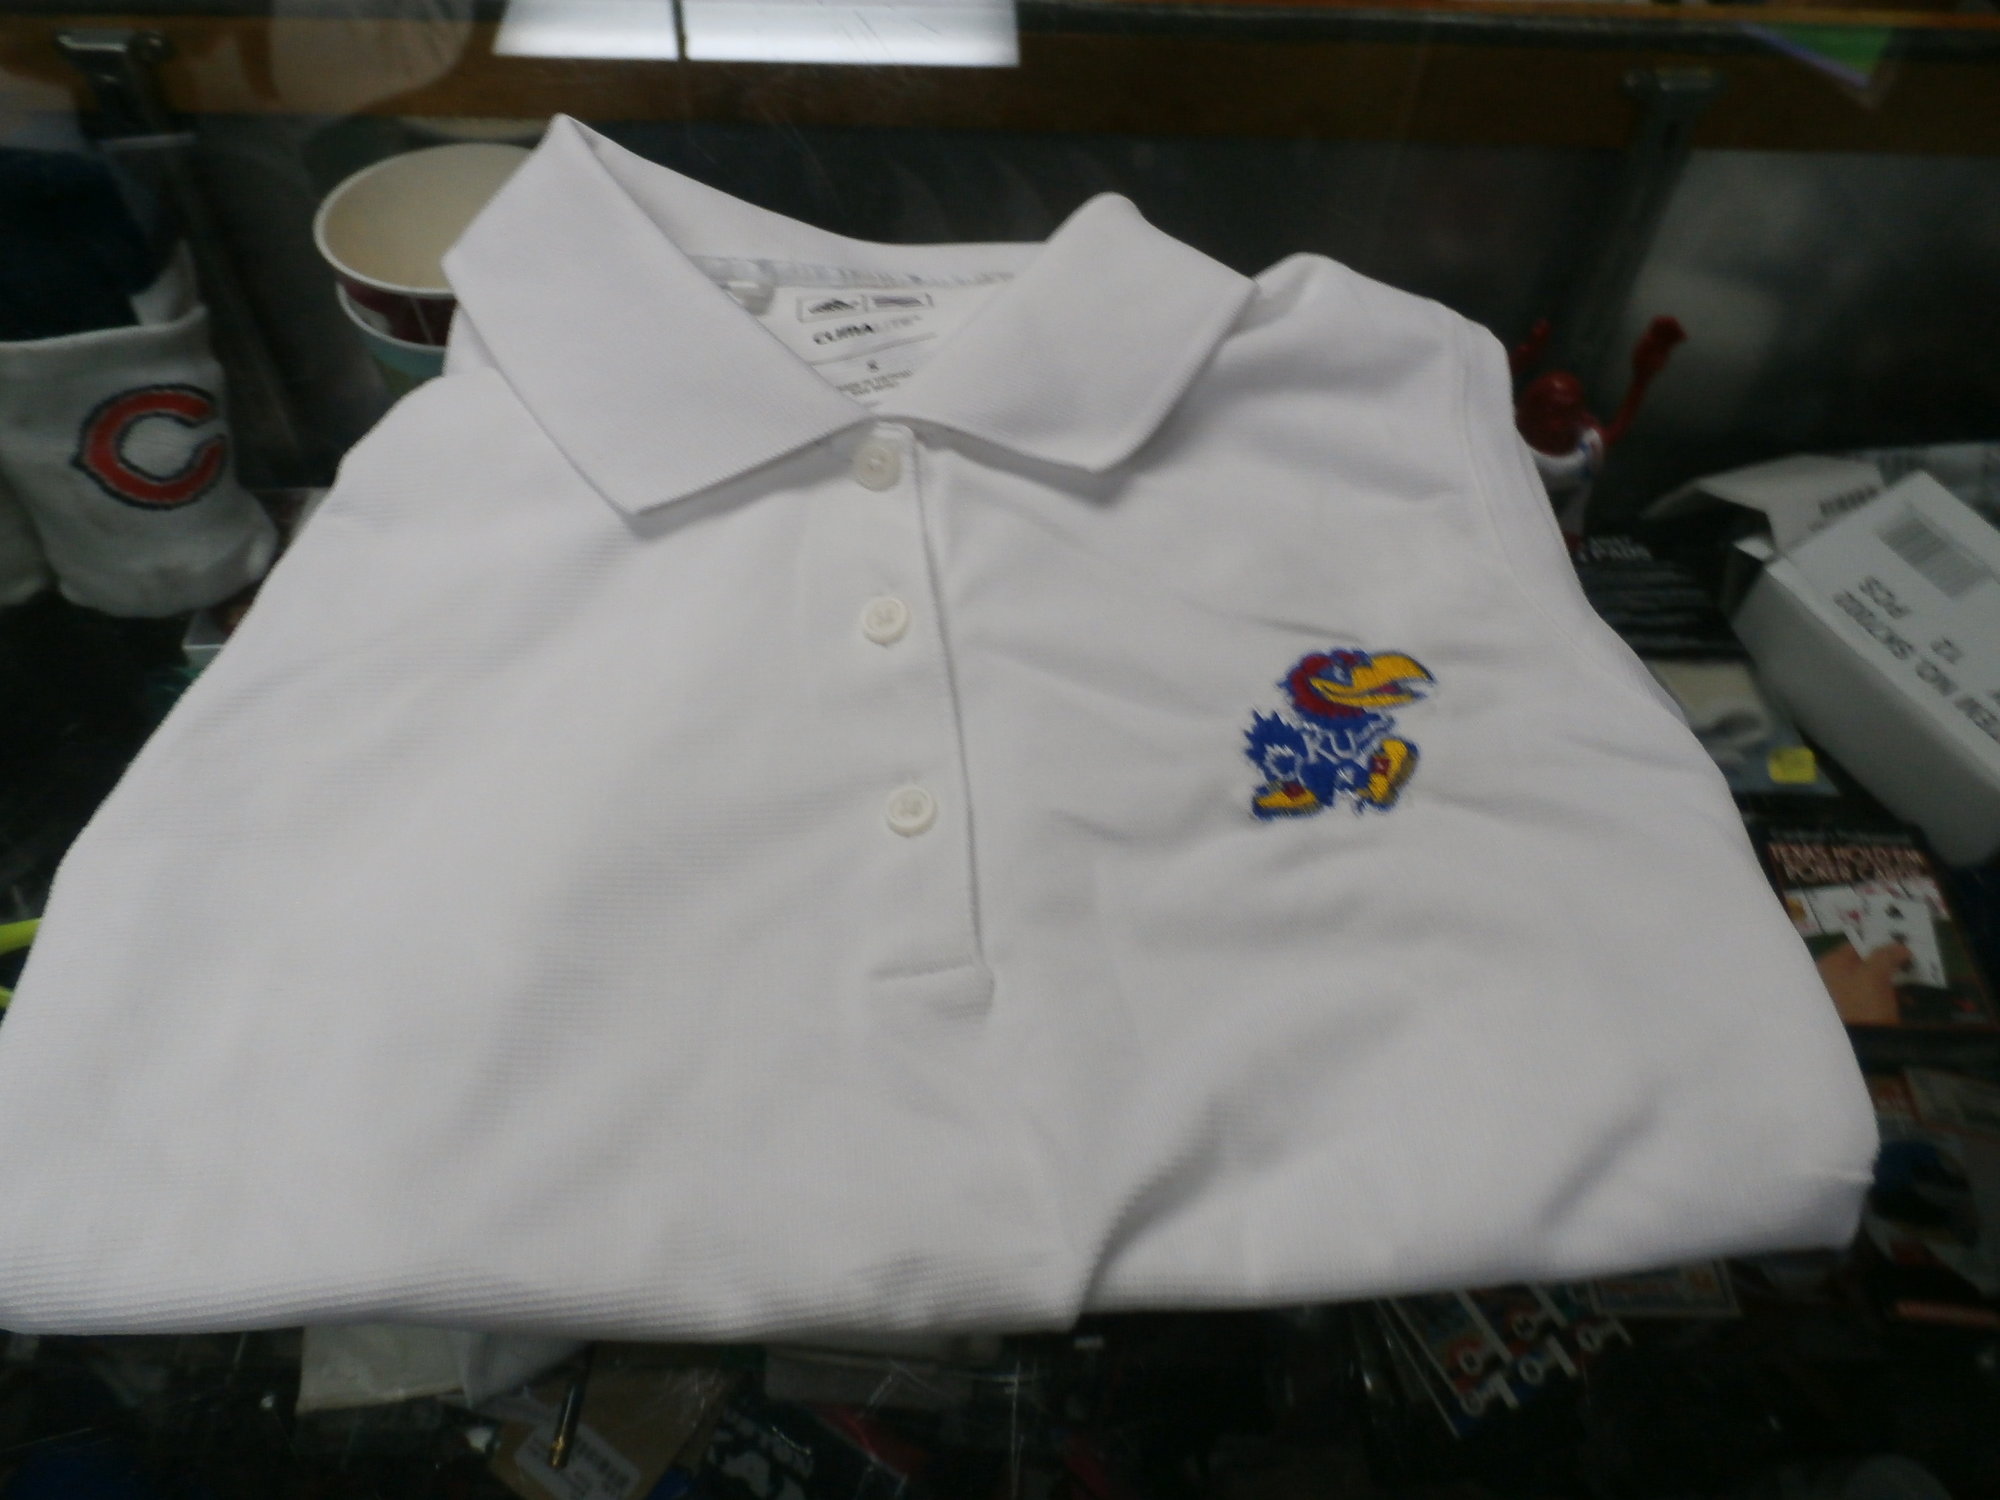 Adidas Kansas Jay Hawks White Women's Polo Shirt Size Small Polyester  #28705
Rating: (see below) 3- Good Condition
Team: Kansas Jay Hawks
Player: Team
Brand: Adidas
Size: Small - Women's(Measured Flat: across chest 17\", length 22\")
Measured flat: armpit to armpit; top of shoulder to the bottom hem
Color: White
Style: women's polo; sleeveless; embroidered; collared with buttons
Material: 100% Polyester
Condition: 3- Good Condition - wrinkled; Minor Pilling and Fuzz; stains around the neck mostly interior of the shirt;
Item #: 28705
Shipping: FREE